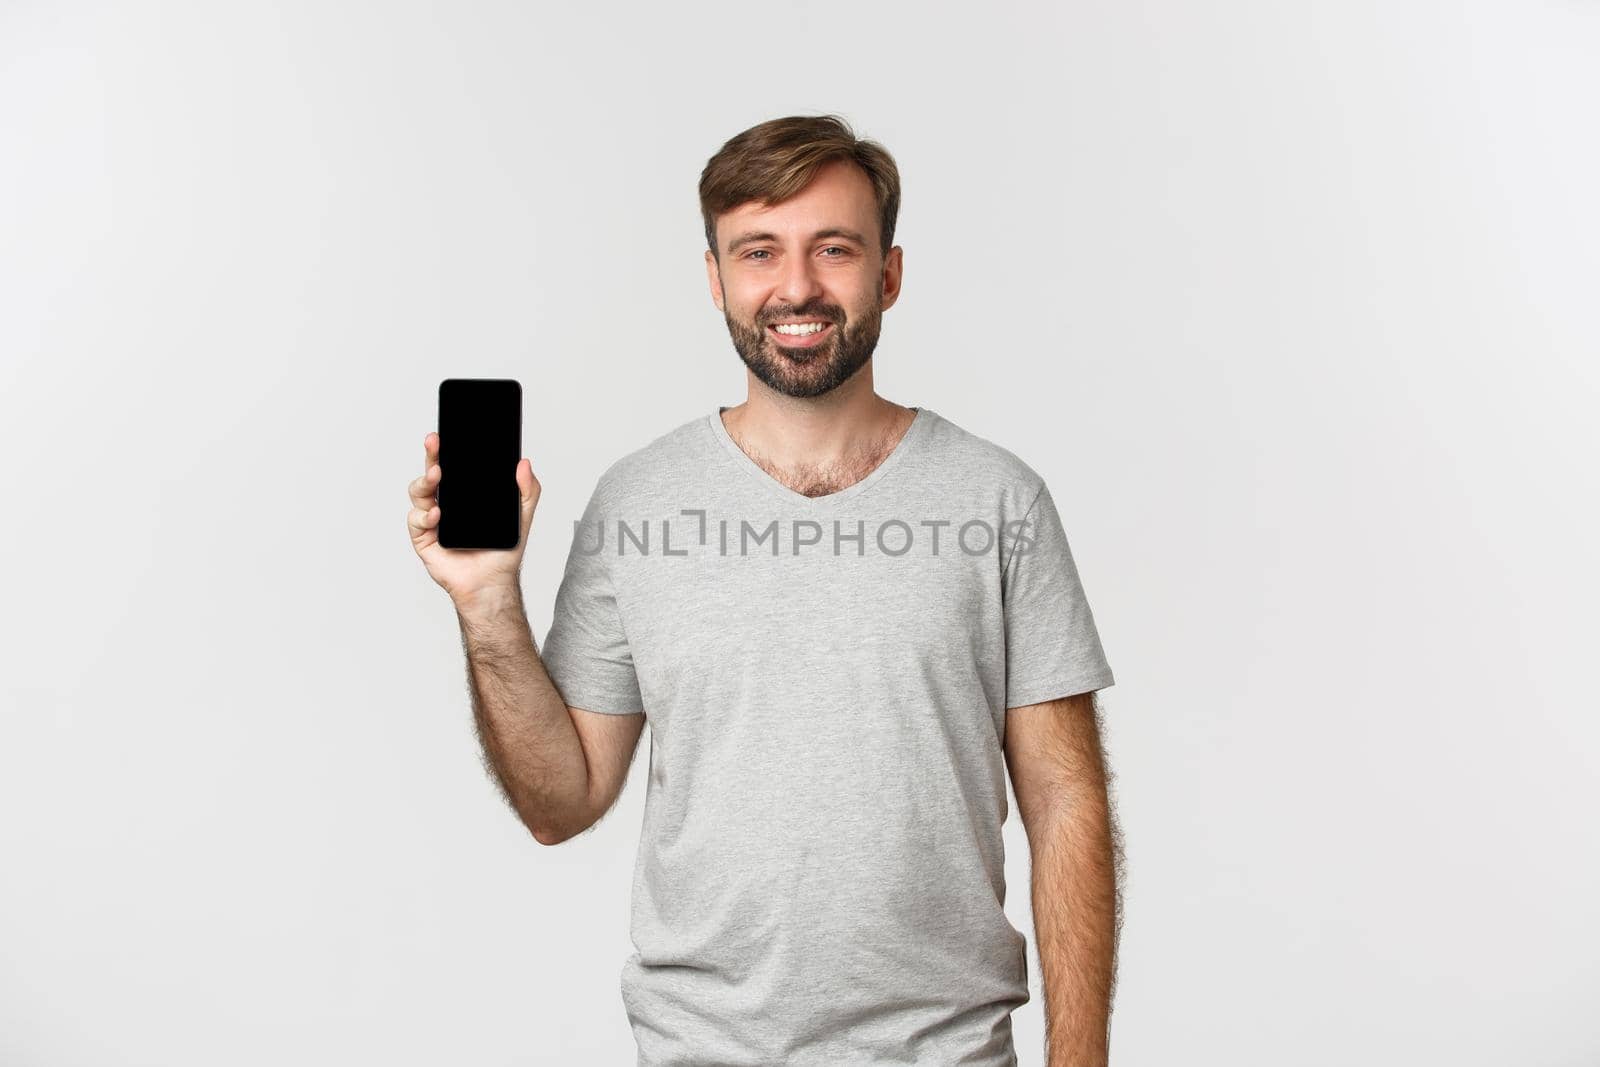 Portrait of smiling handsome man in gray t-shirt, showing mobile phone screen, recommending app or shopping site, standing over white background.